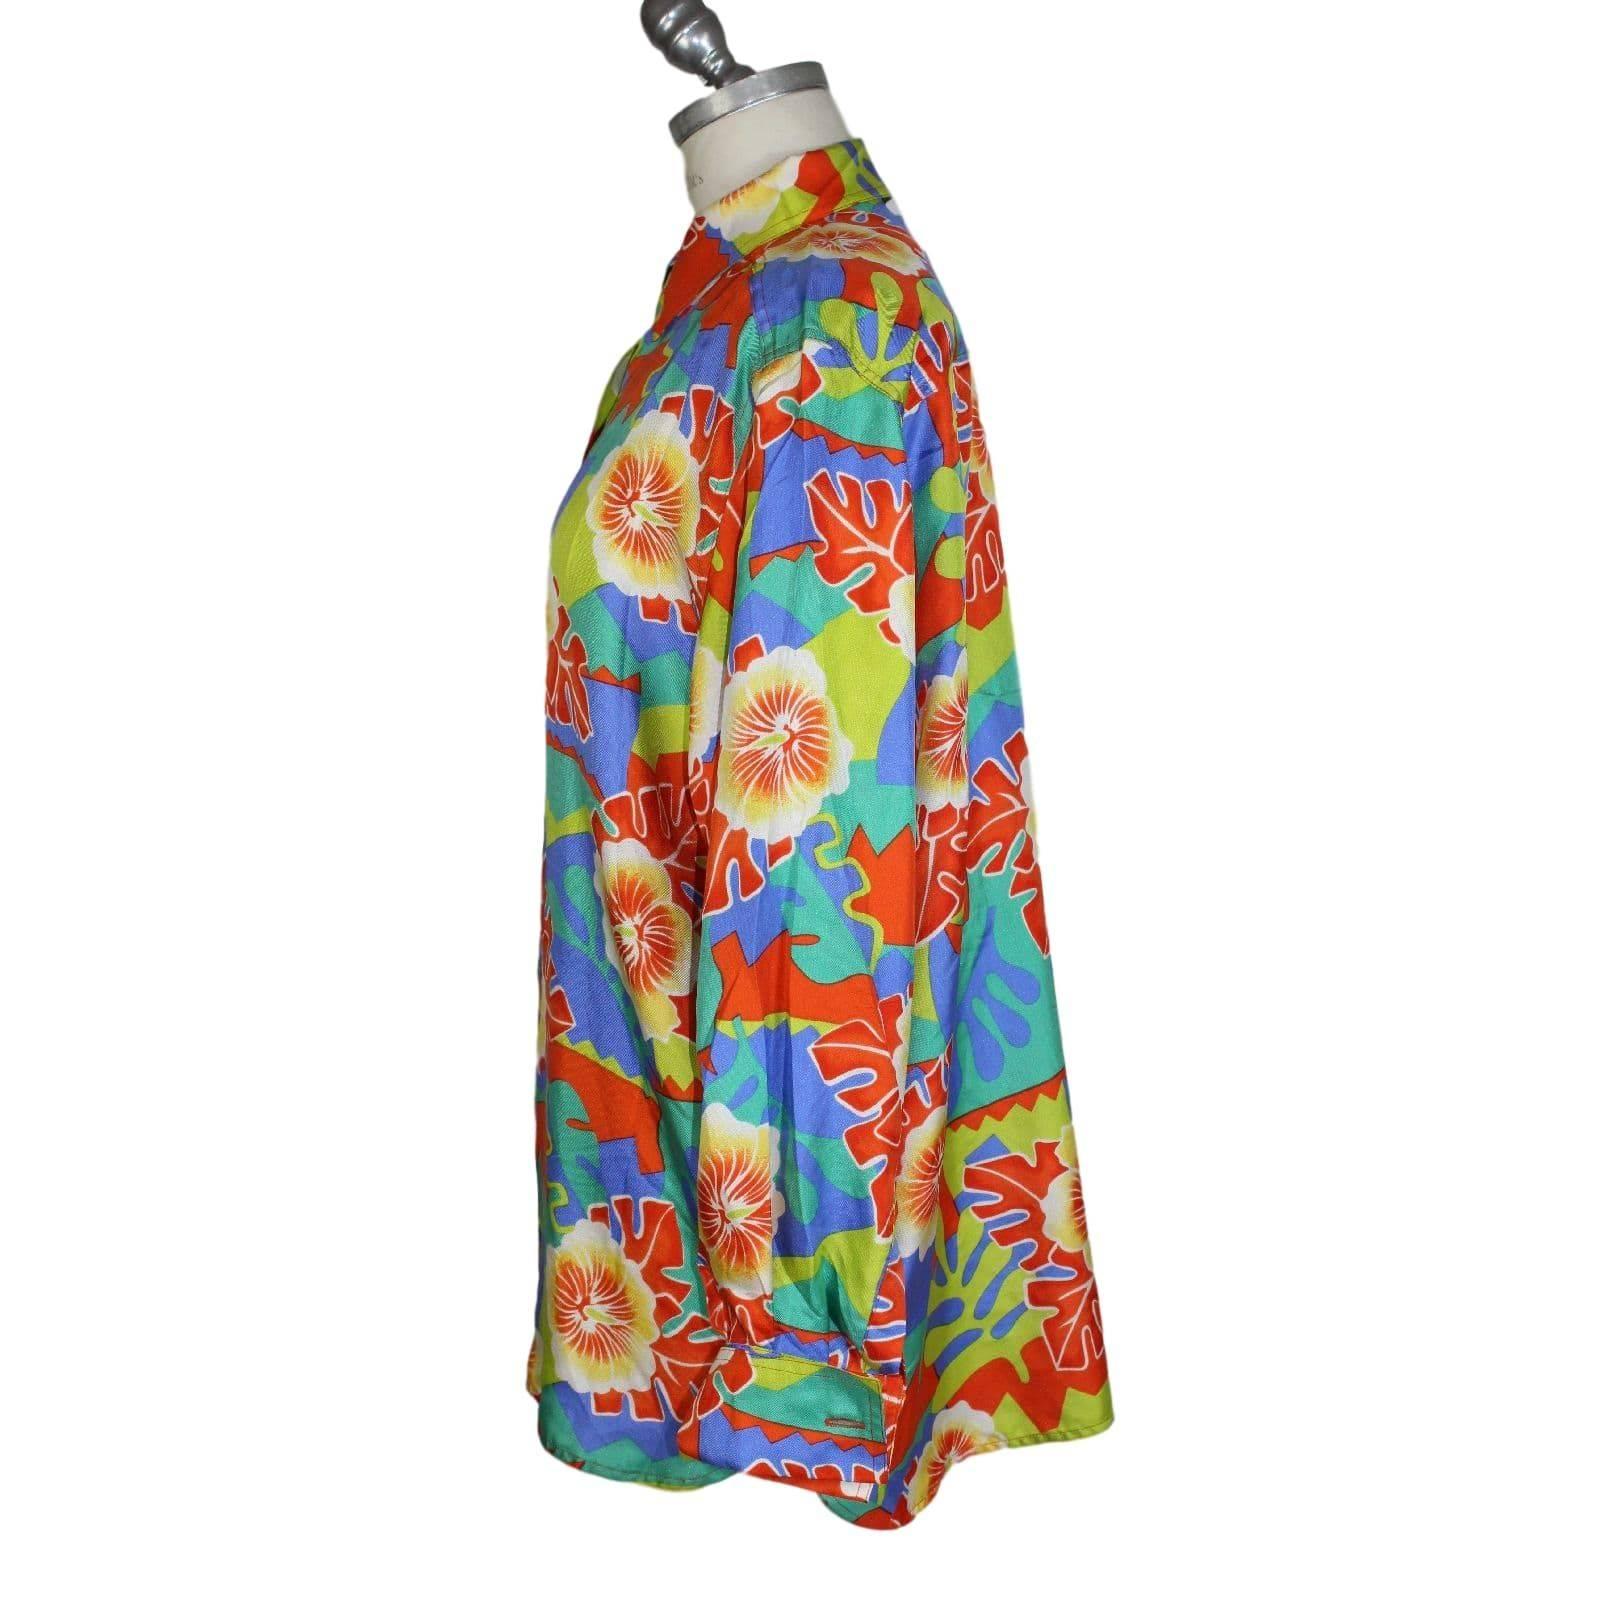 Nazareno Gabrielli multicolored silk flowered shirt with cuffed cuffs and twin closure.

Size 44 (IT)
Measures
Shoulder: 44 cm
Armpit to armpit: 58 cm
Length: 77 cm
Sleeves: 59 cm

Composition: 100% silk
Color: multicolor
Condition: excellent